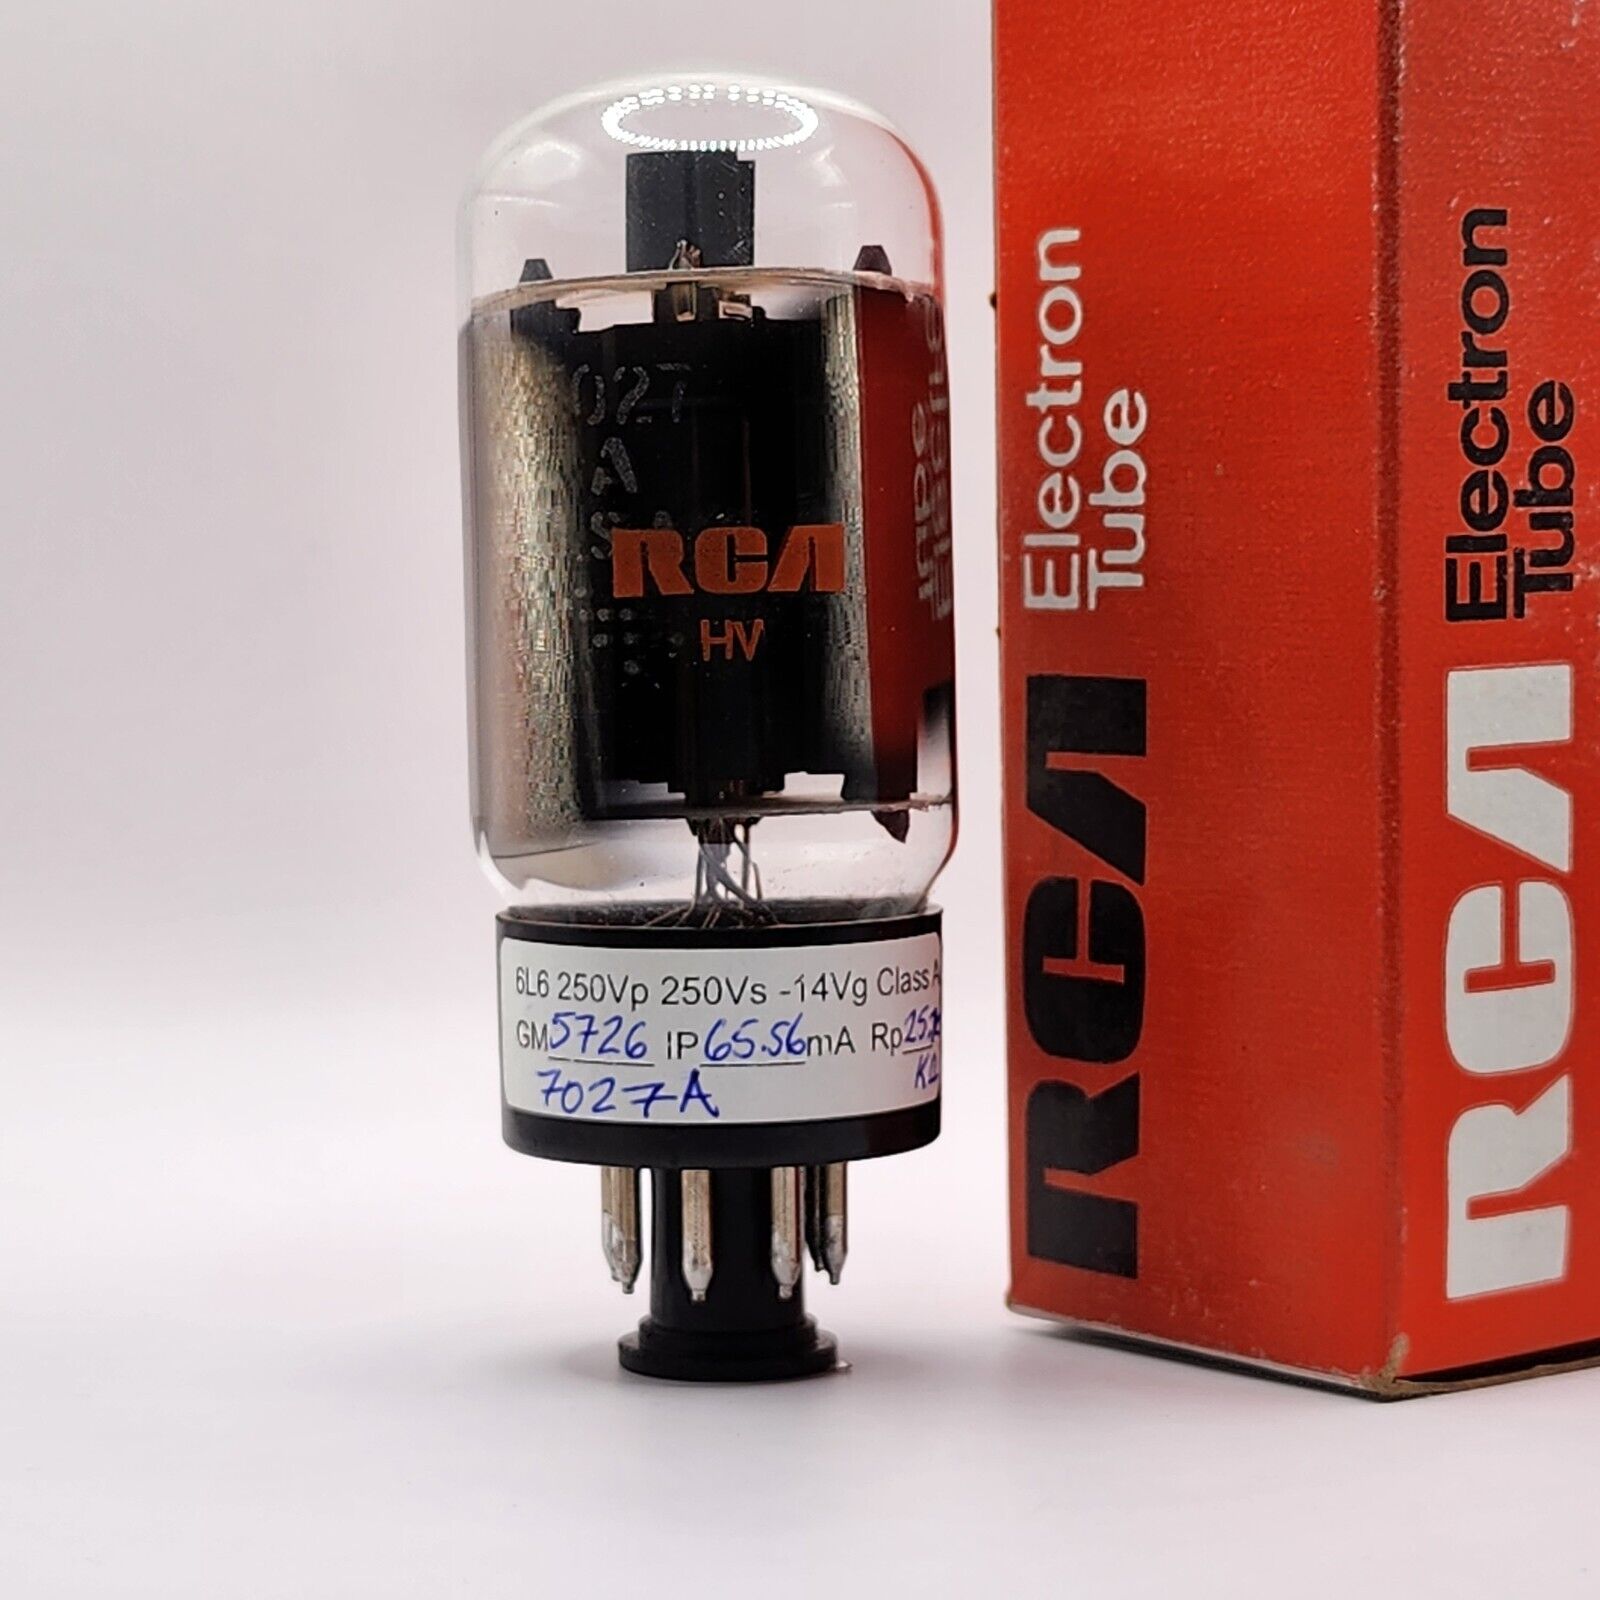 GE/RCA 7027A Power Tube Tested @ Class A Test Results - Curve Tracer - uTracer3+